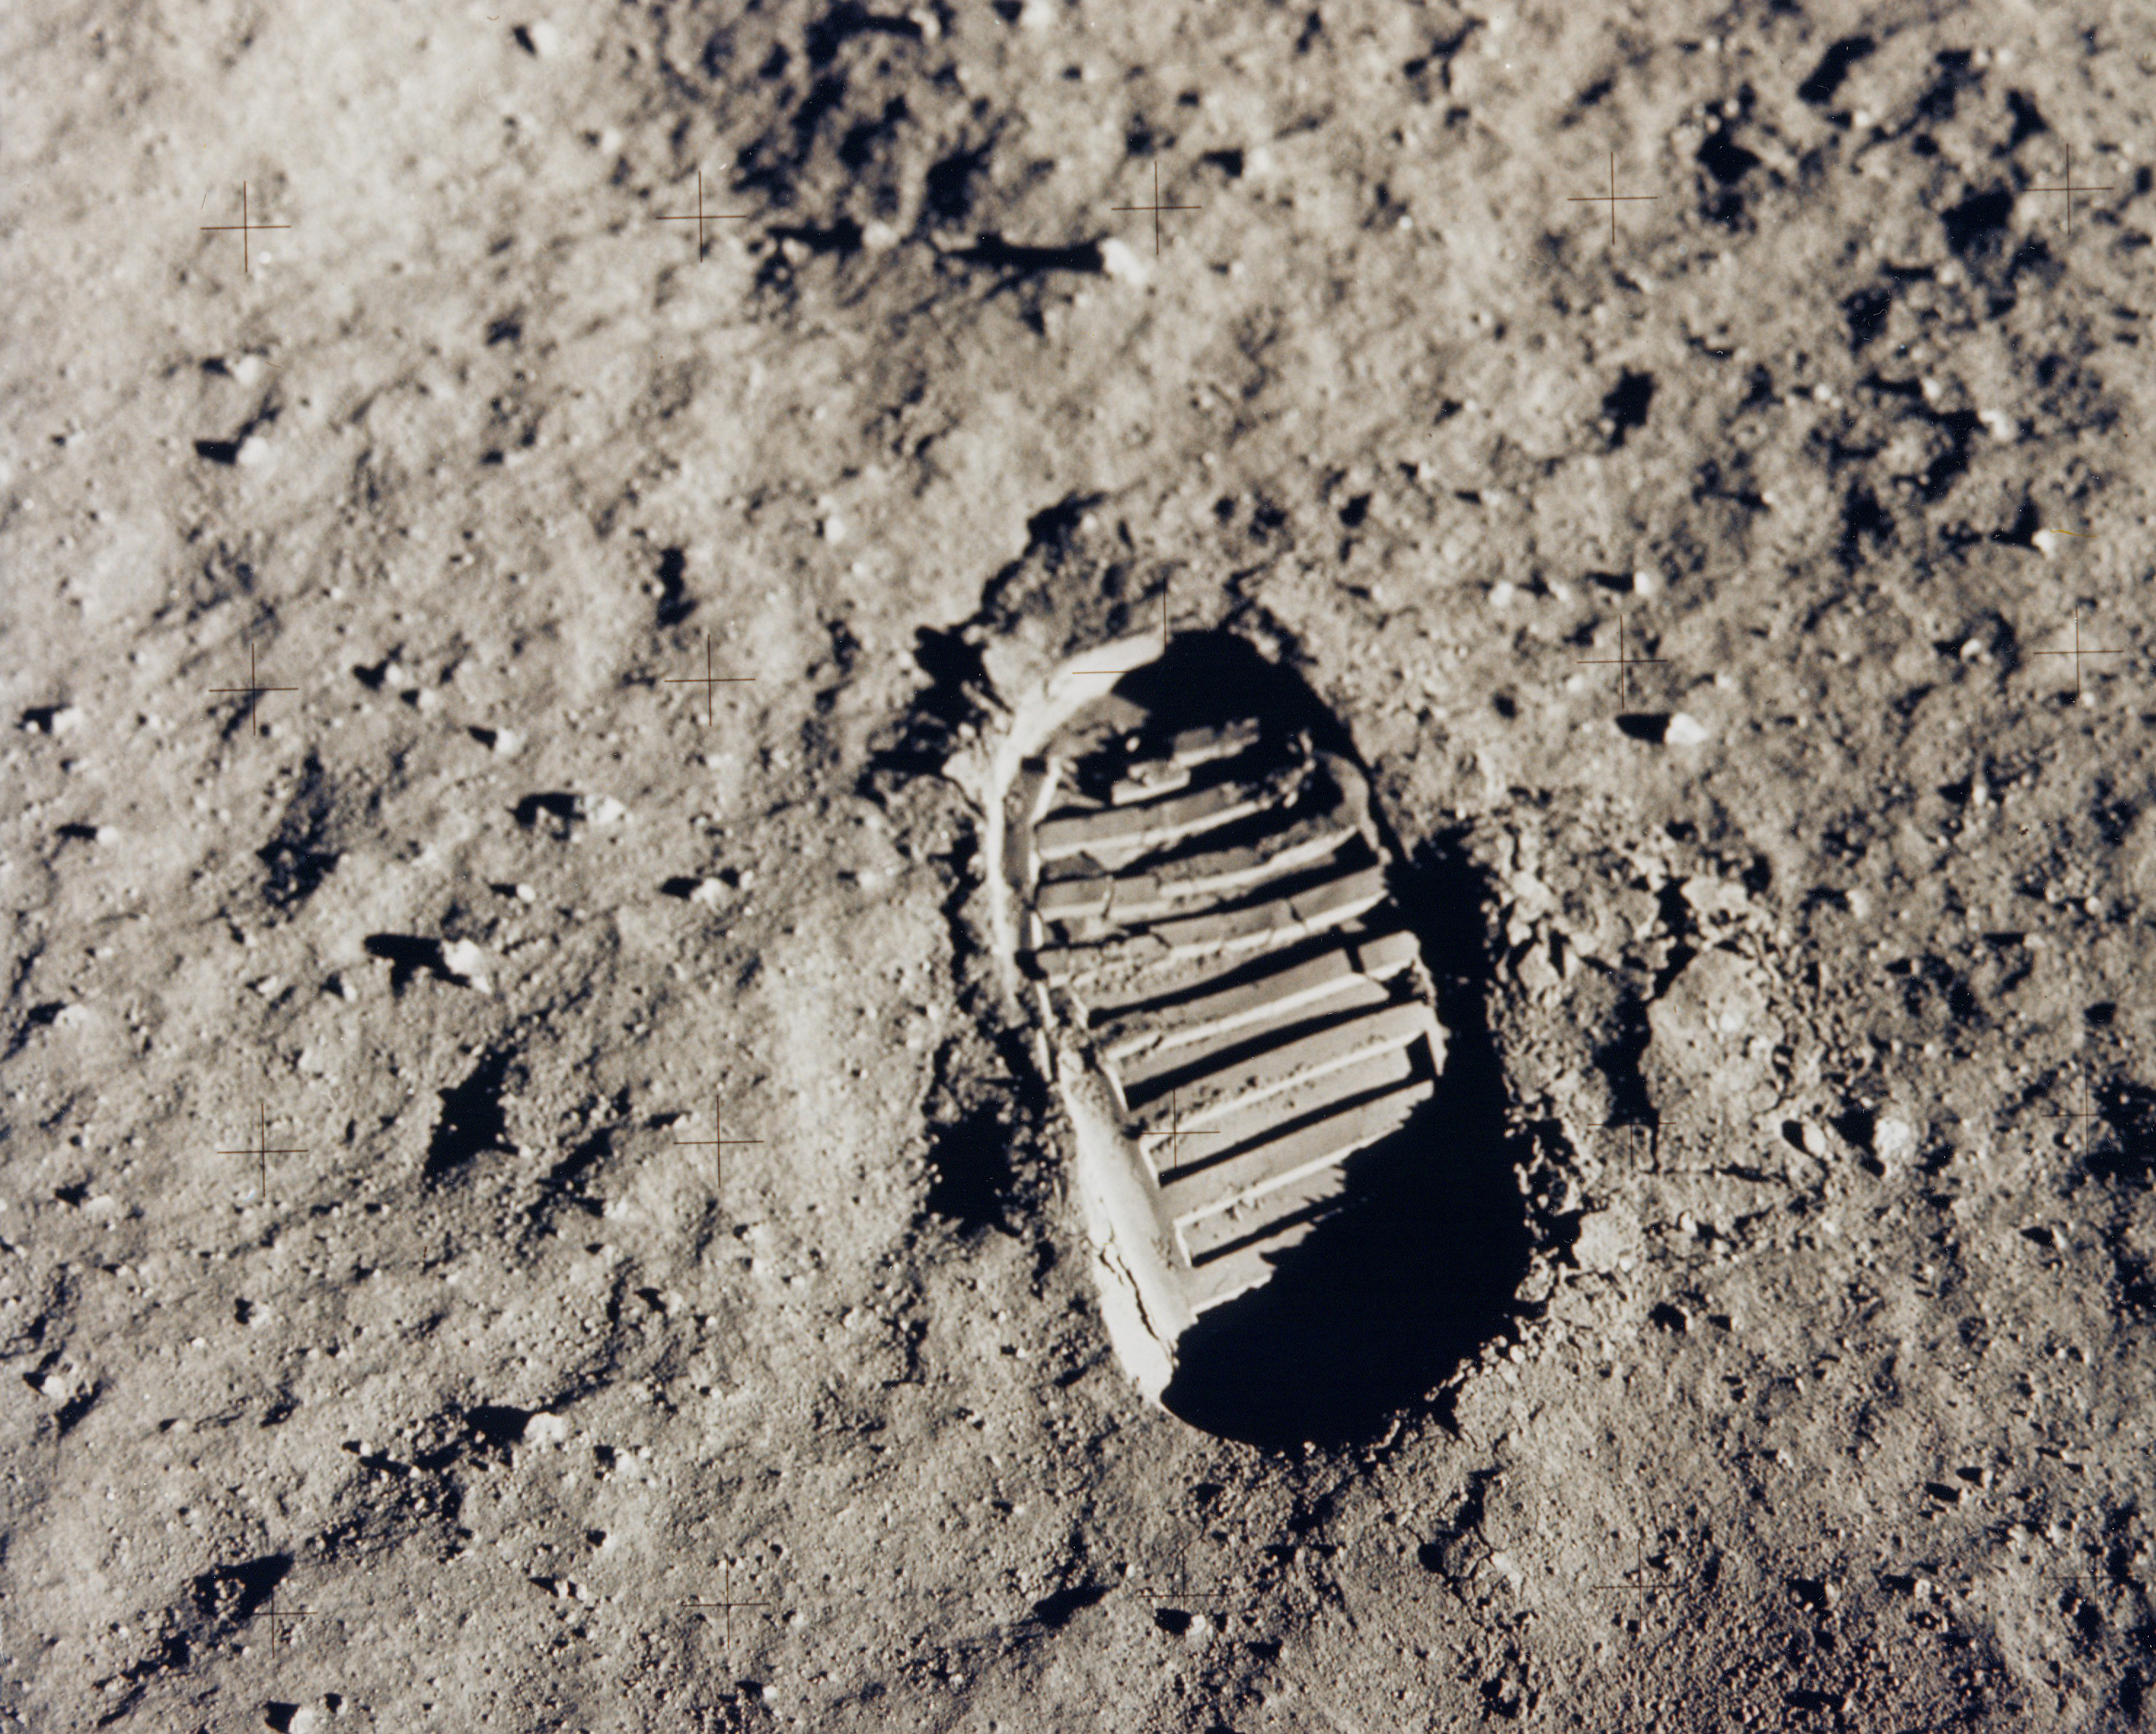 This bootprint marks one of the first steps human beings took on the moon in July 1969.